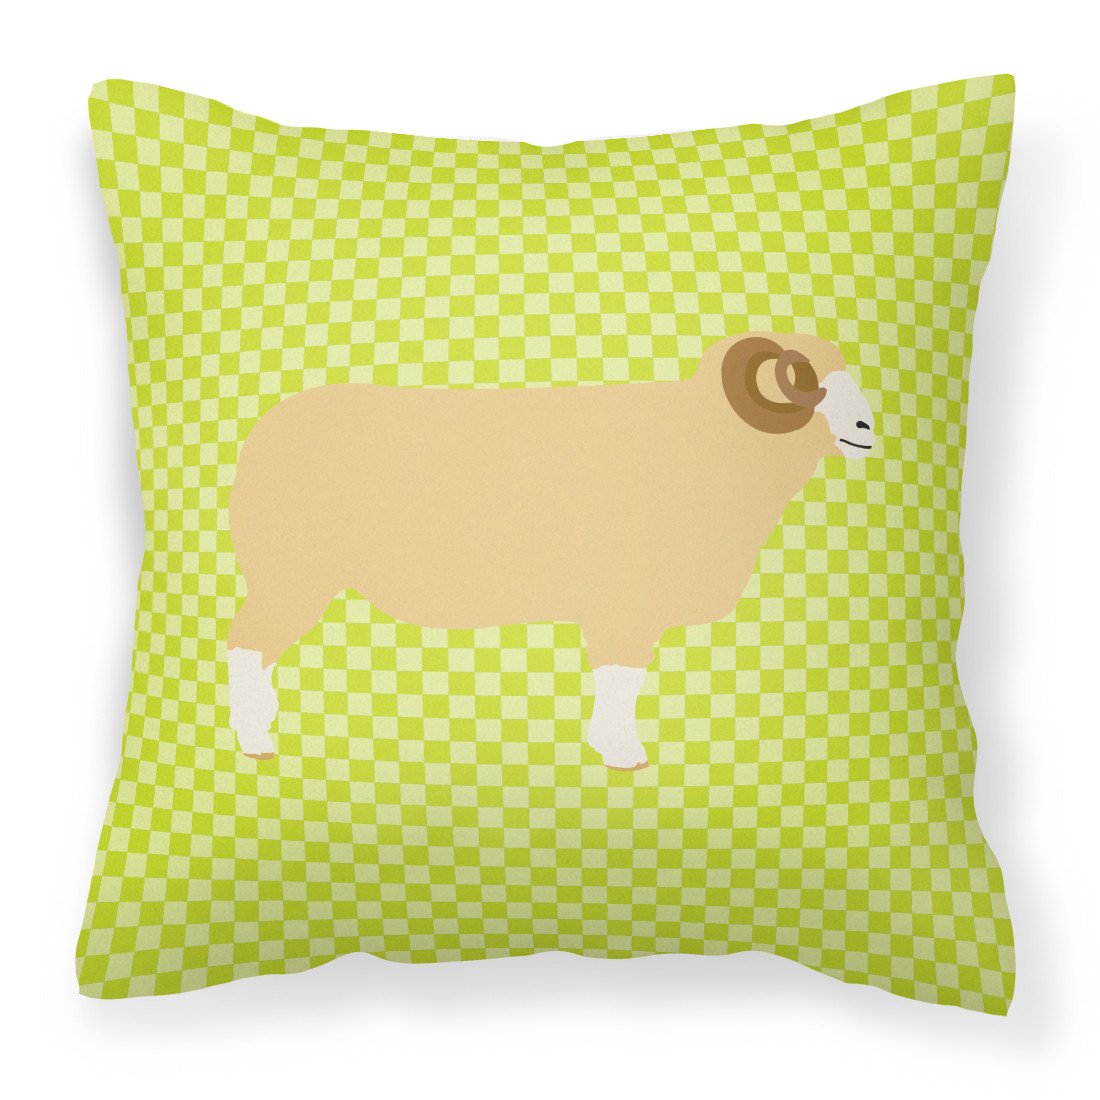 Horned Dorset Sheep Green Fabric Decorative Pillow BB7806PW1818 by Caroline's Treasures